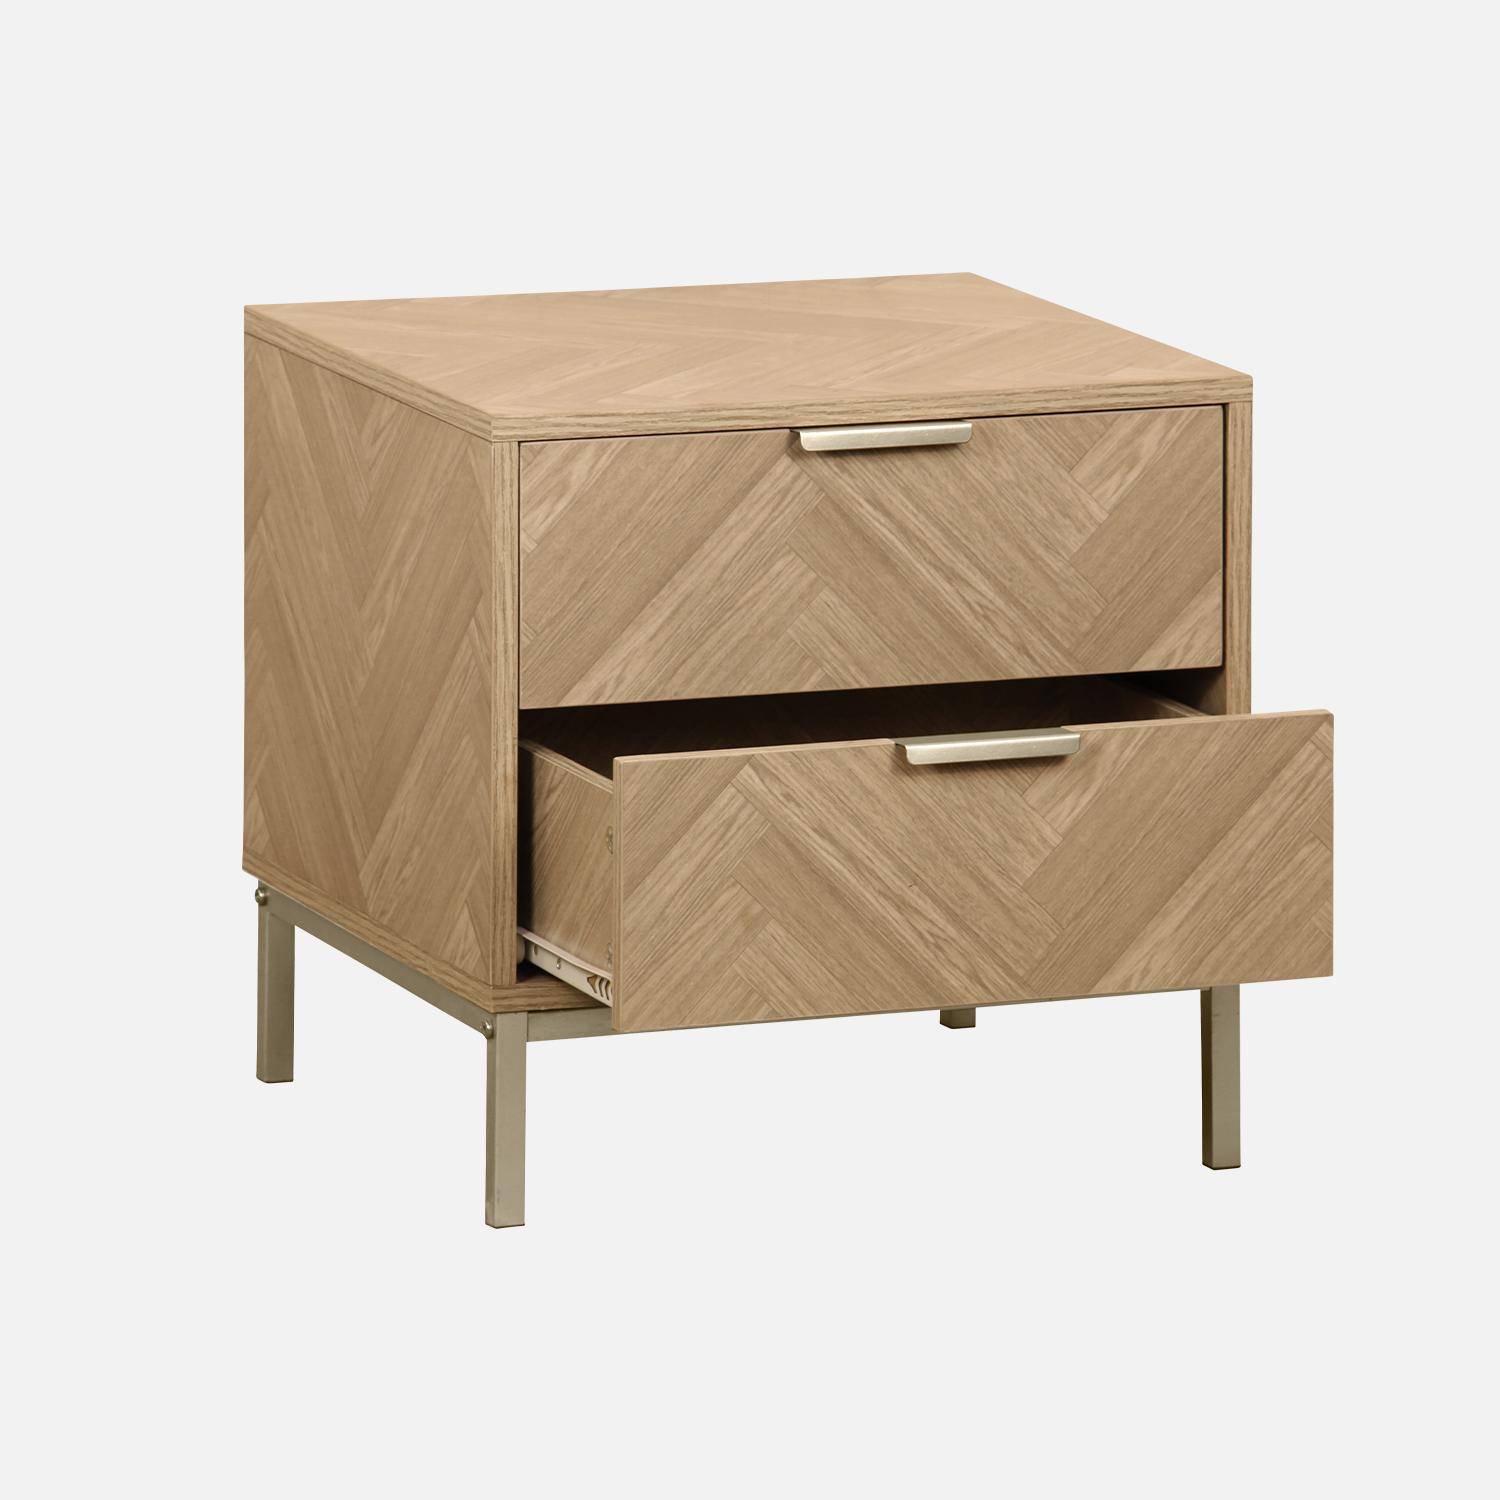 Herringbone bedside table with 2 drawers, 45x40x45cm - Budapest - Natural Photo5